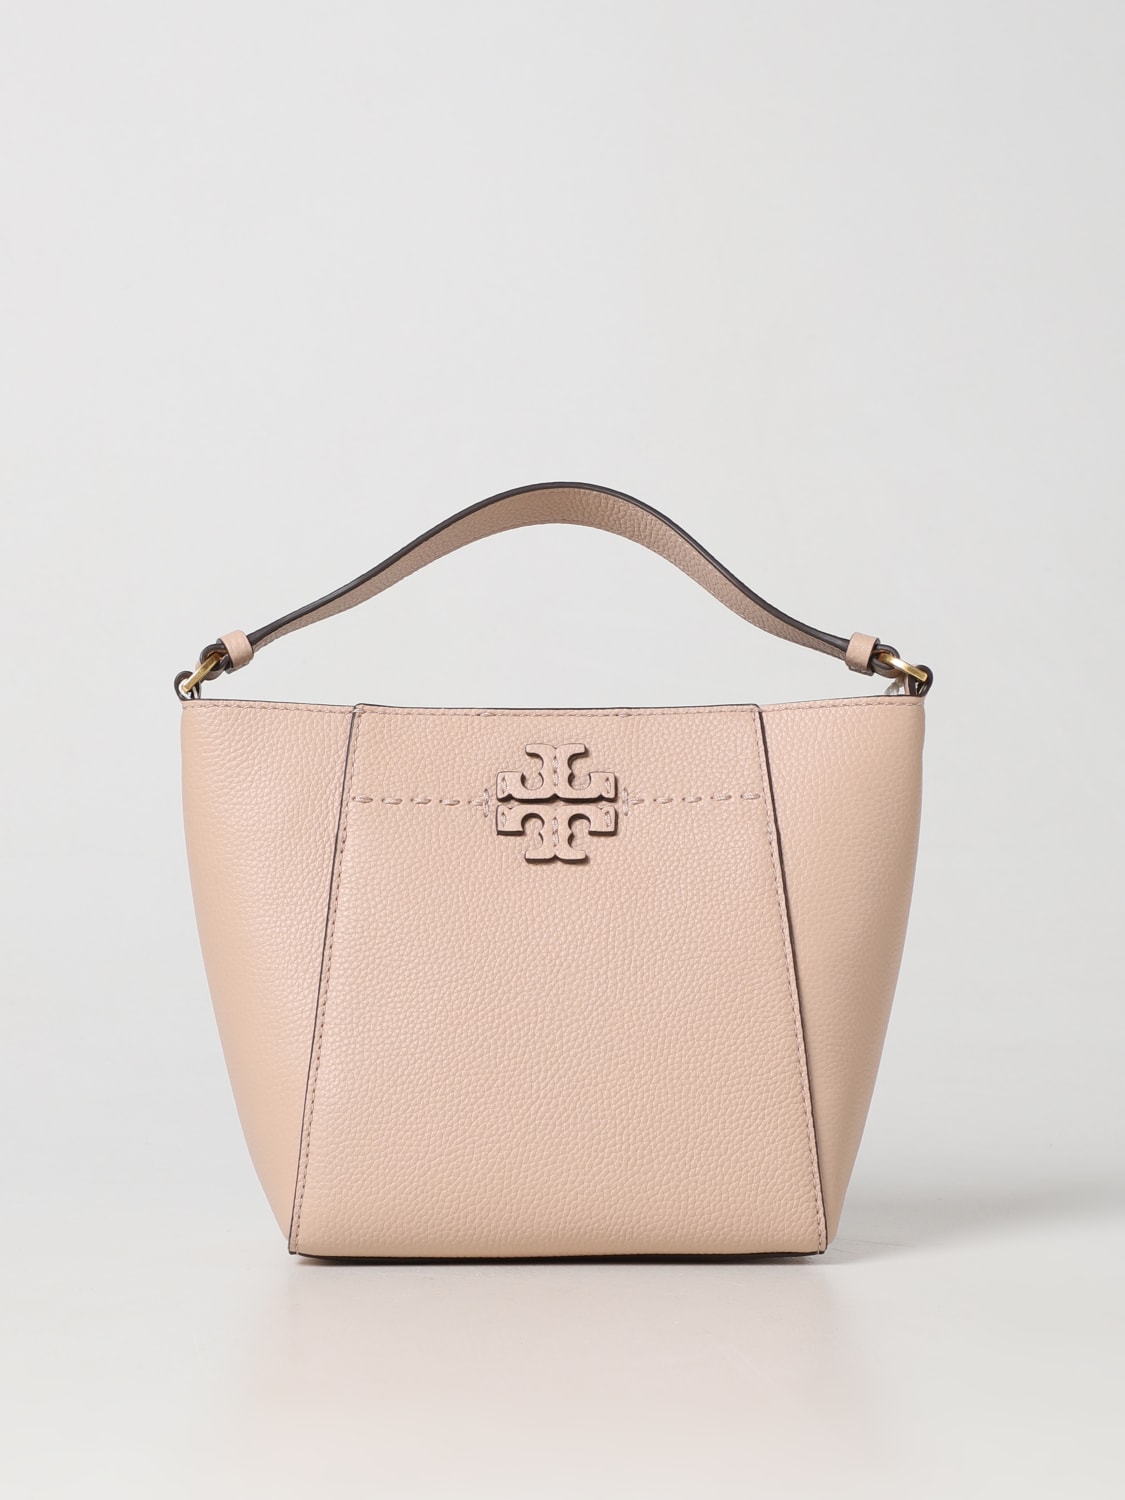 Tory Burch Bags in Pink